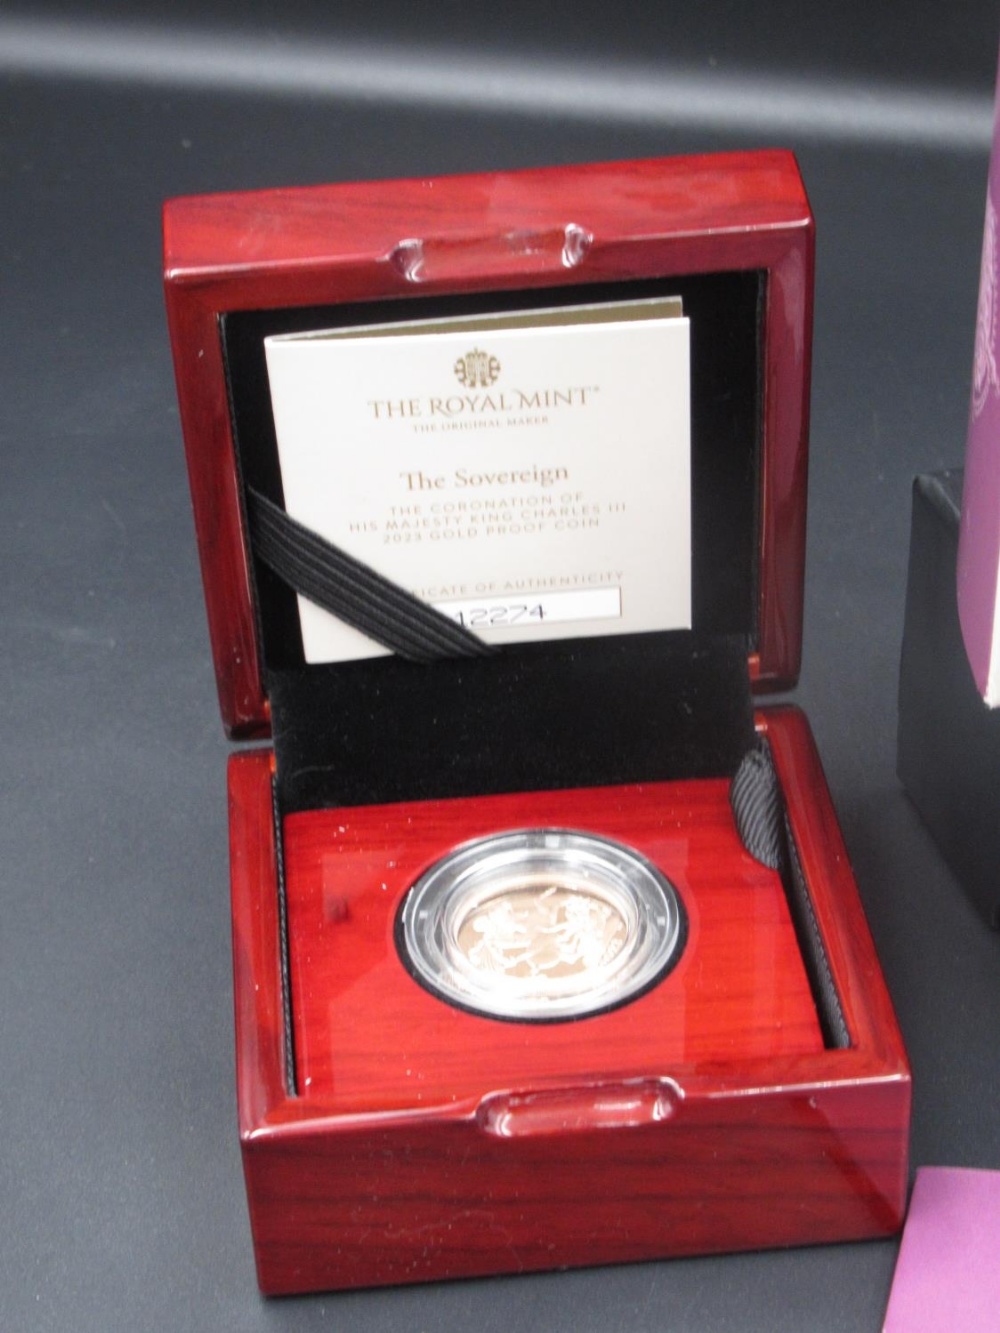 The Royal Mint cased The Sovereign Coronation of King Charles III 2023 Gold Proof Coin, - Image 2 of 3